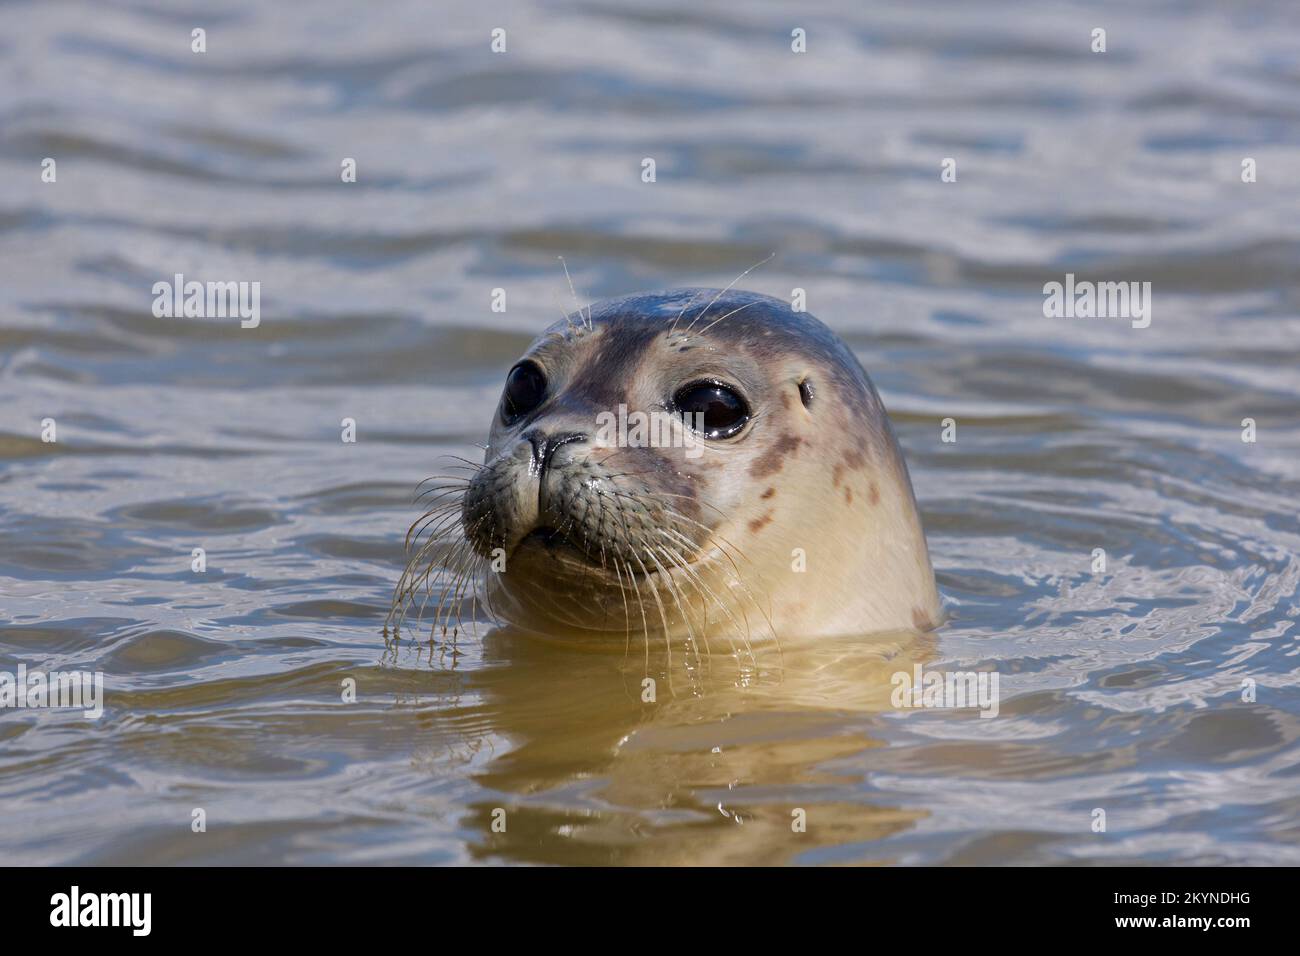 Young common seal / harbour seal (Phoca vitulina) close-up of juvenile swimming in the North Sea Stock Photo